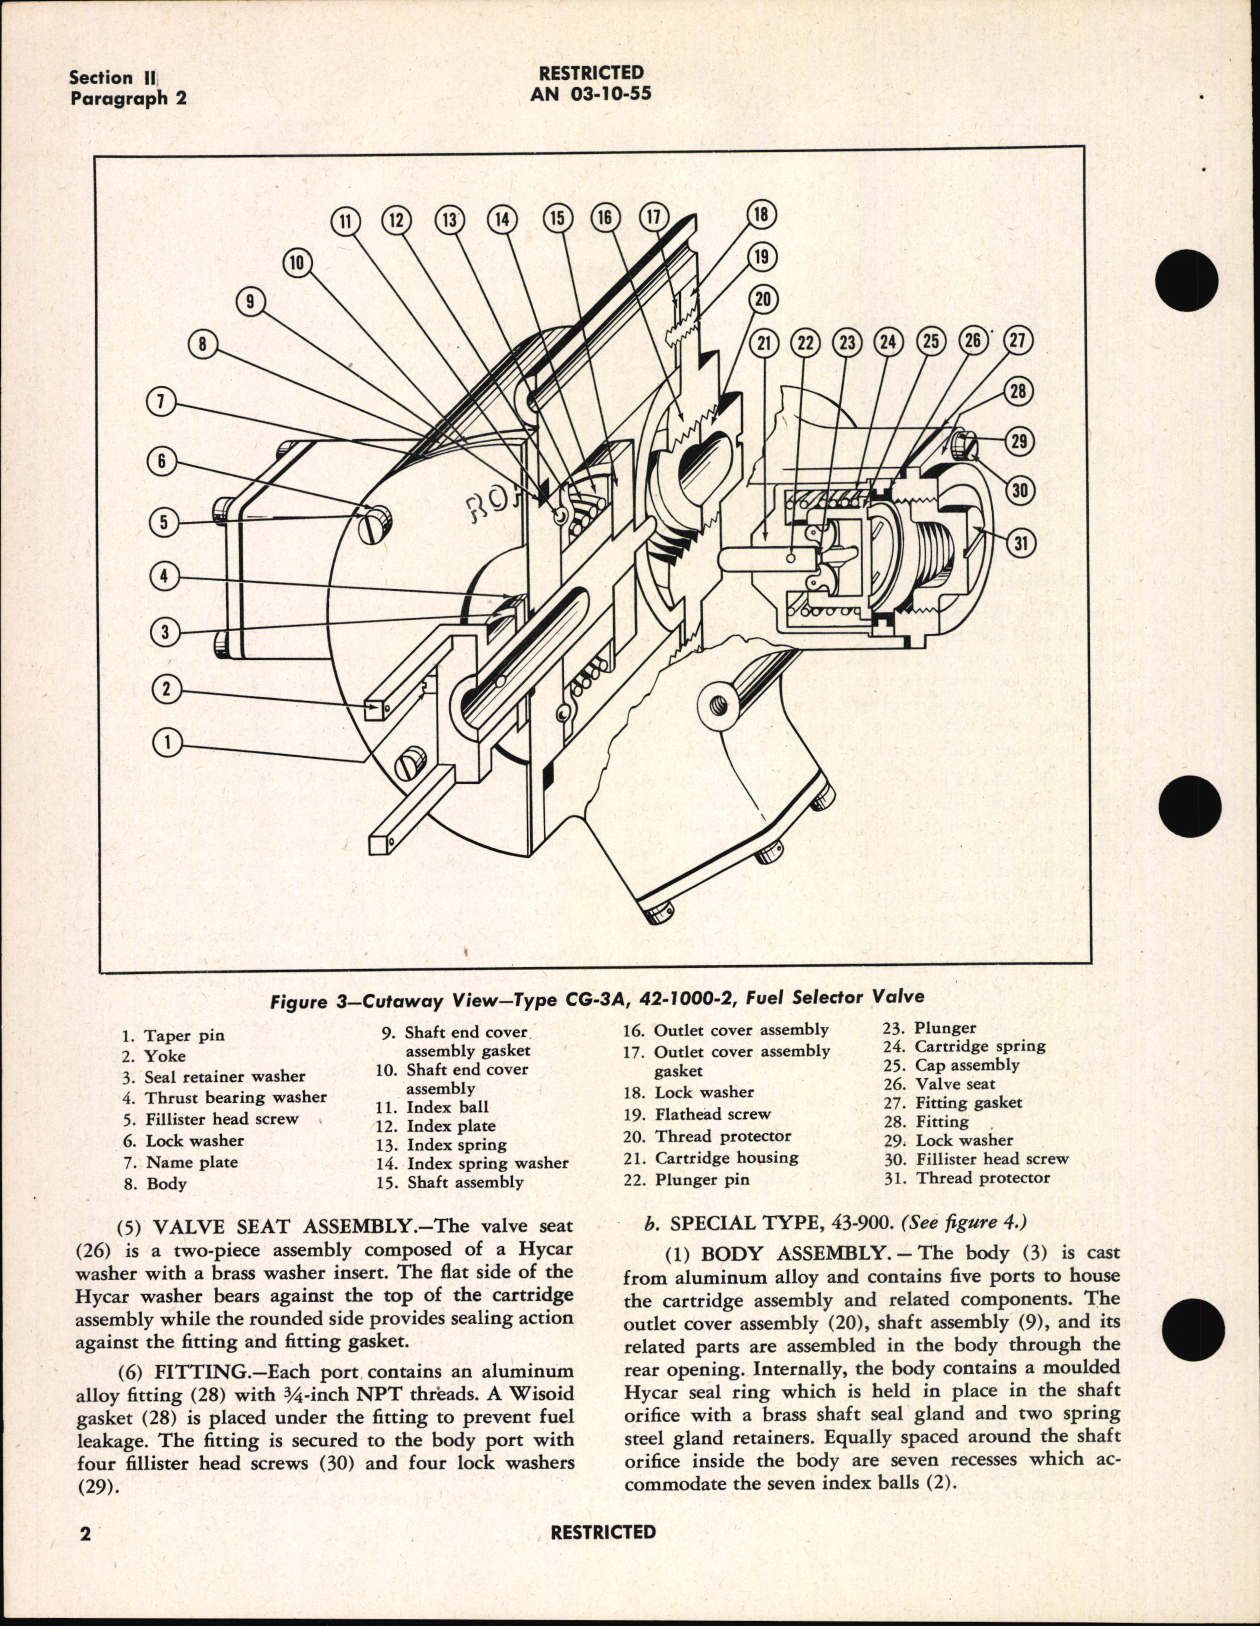 Sample page 6 from AirCorps Library document: Overhaul Instructions with Parts Catalog for Type CG-3A (42-1000-2) and Special Type 43-900 Fuel Selector Valves